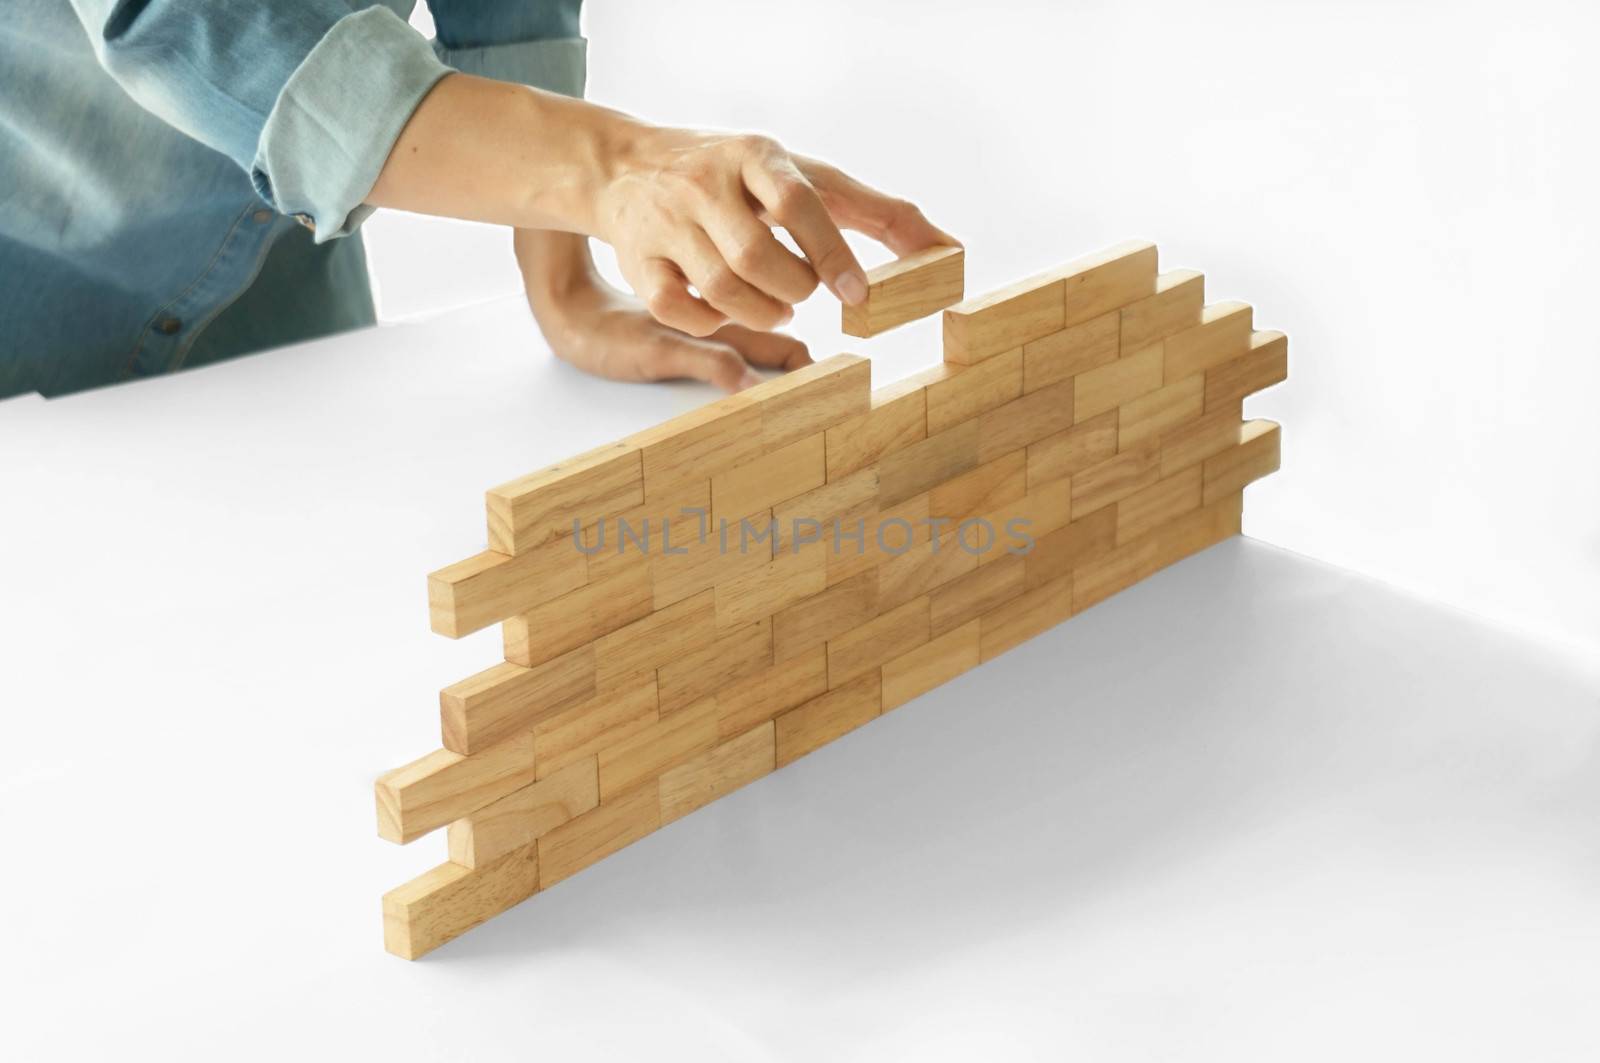 Woman in jeans shirt holding blocks wood game (jenga) Building a by peandben